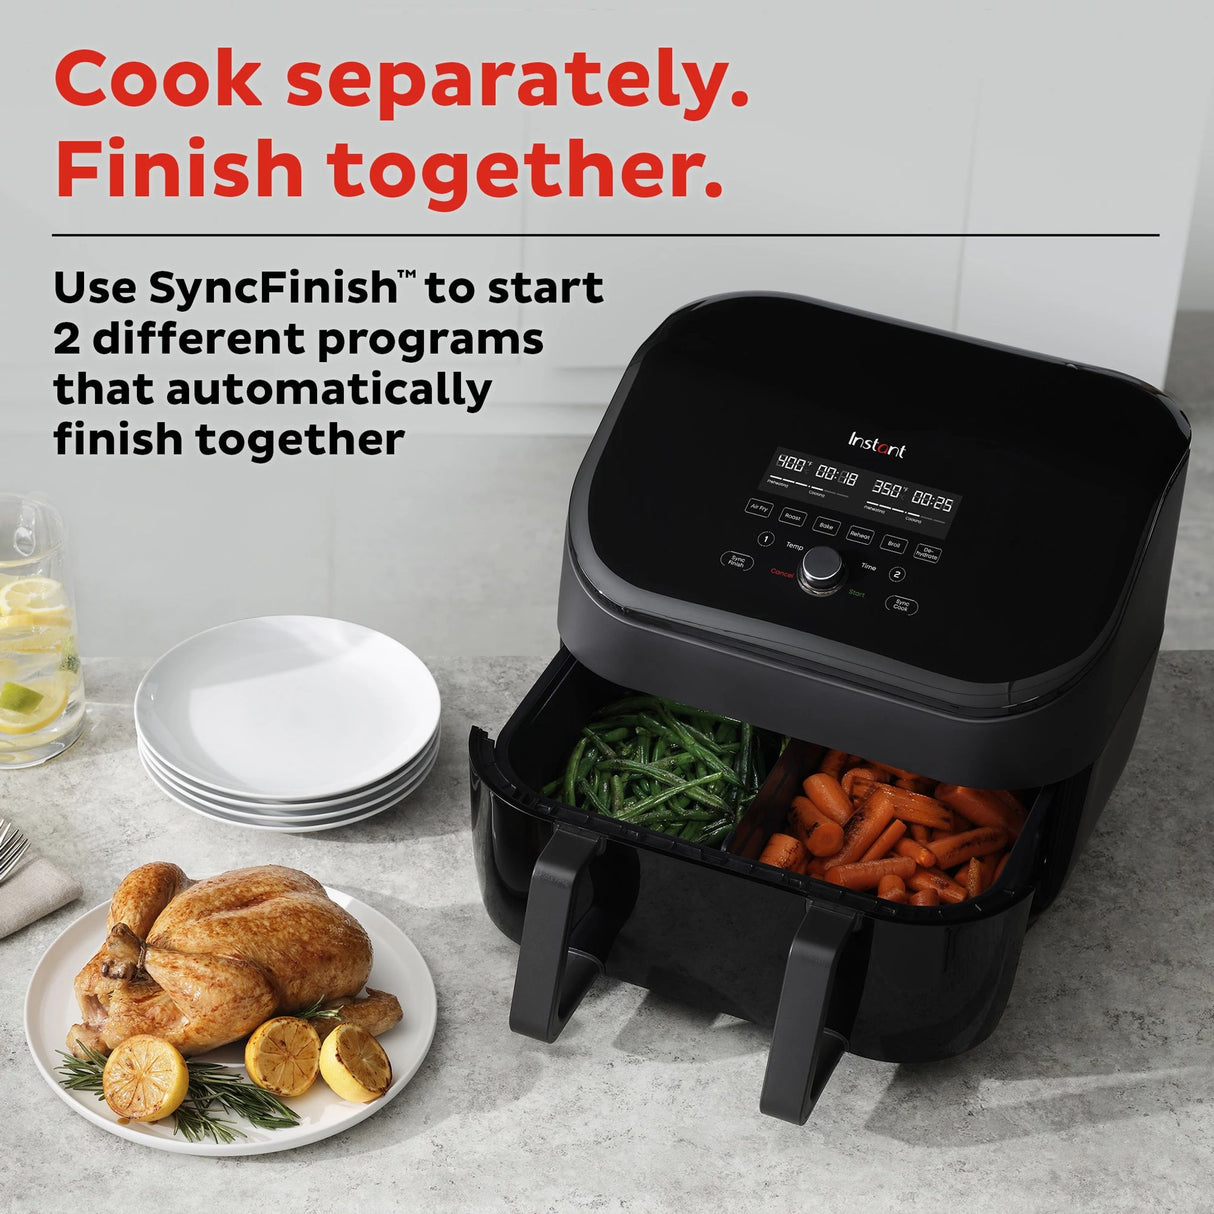  Instant Vortex 9-qt Air Fryer with VersaZone Technology with text Cook separately. Finish together.